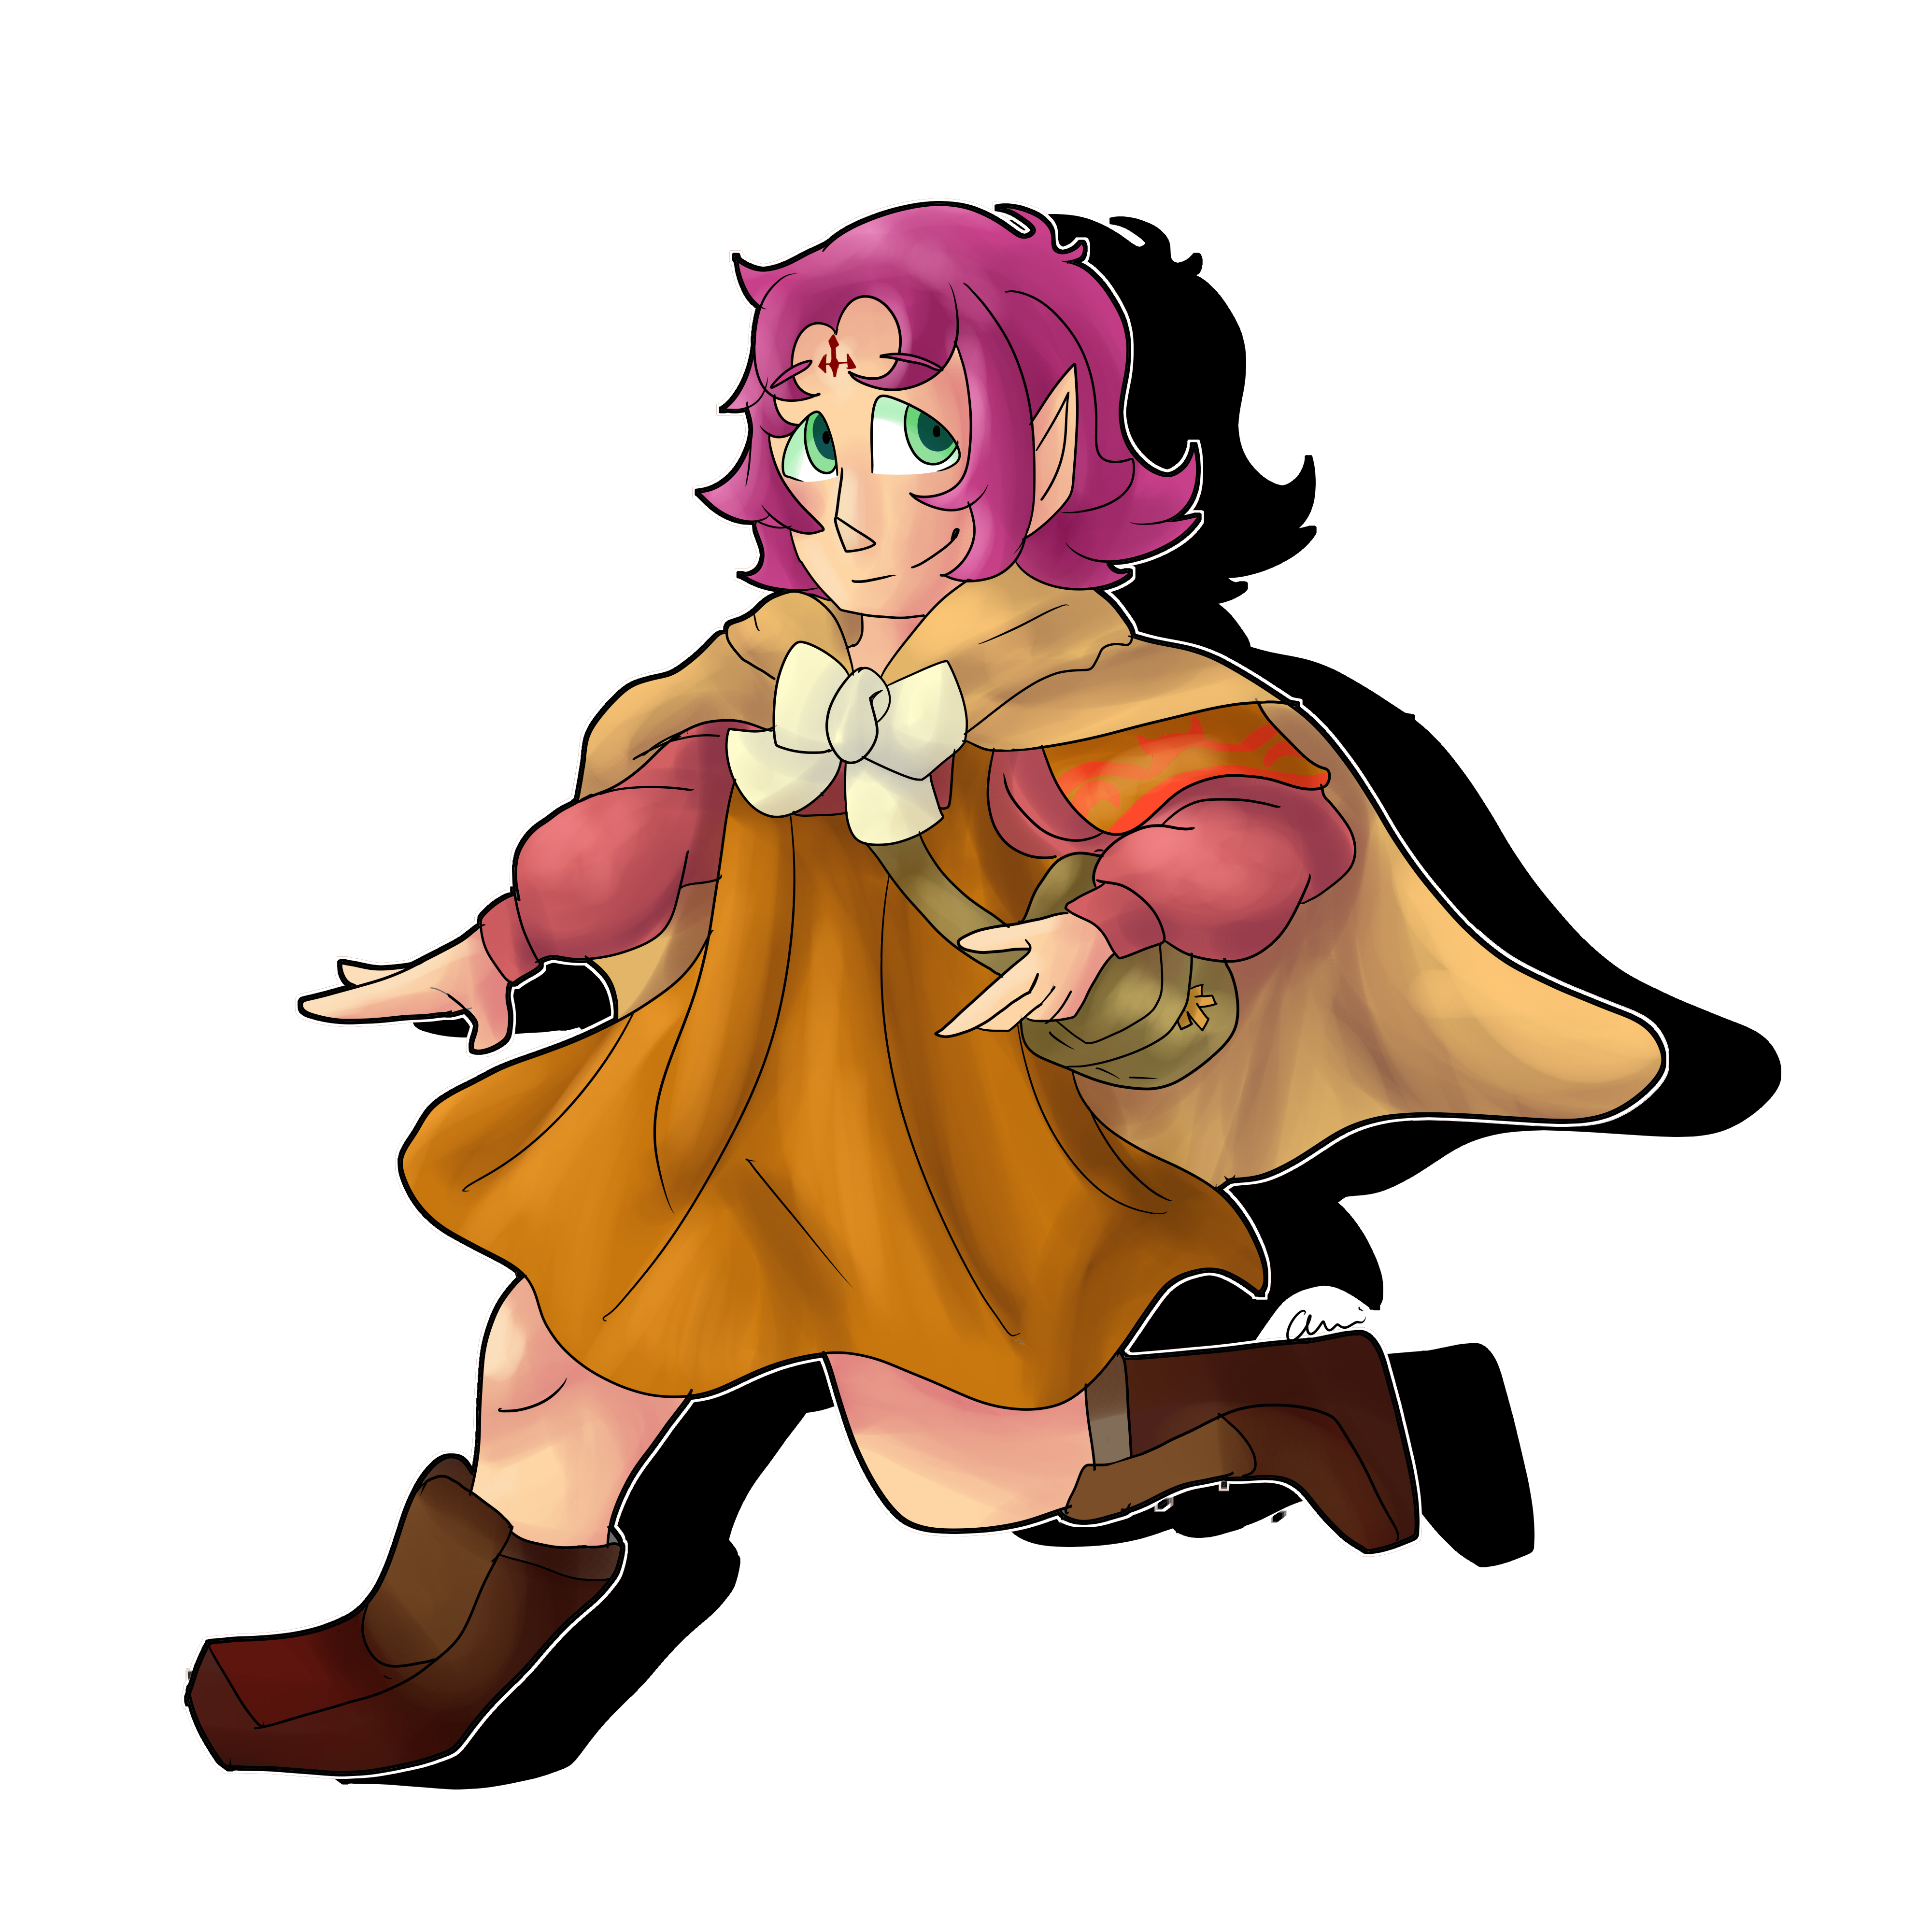 fae___fanart___by_annago_arts-dcaeanv.png